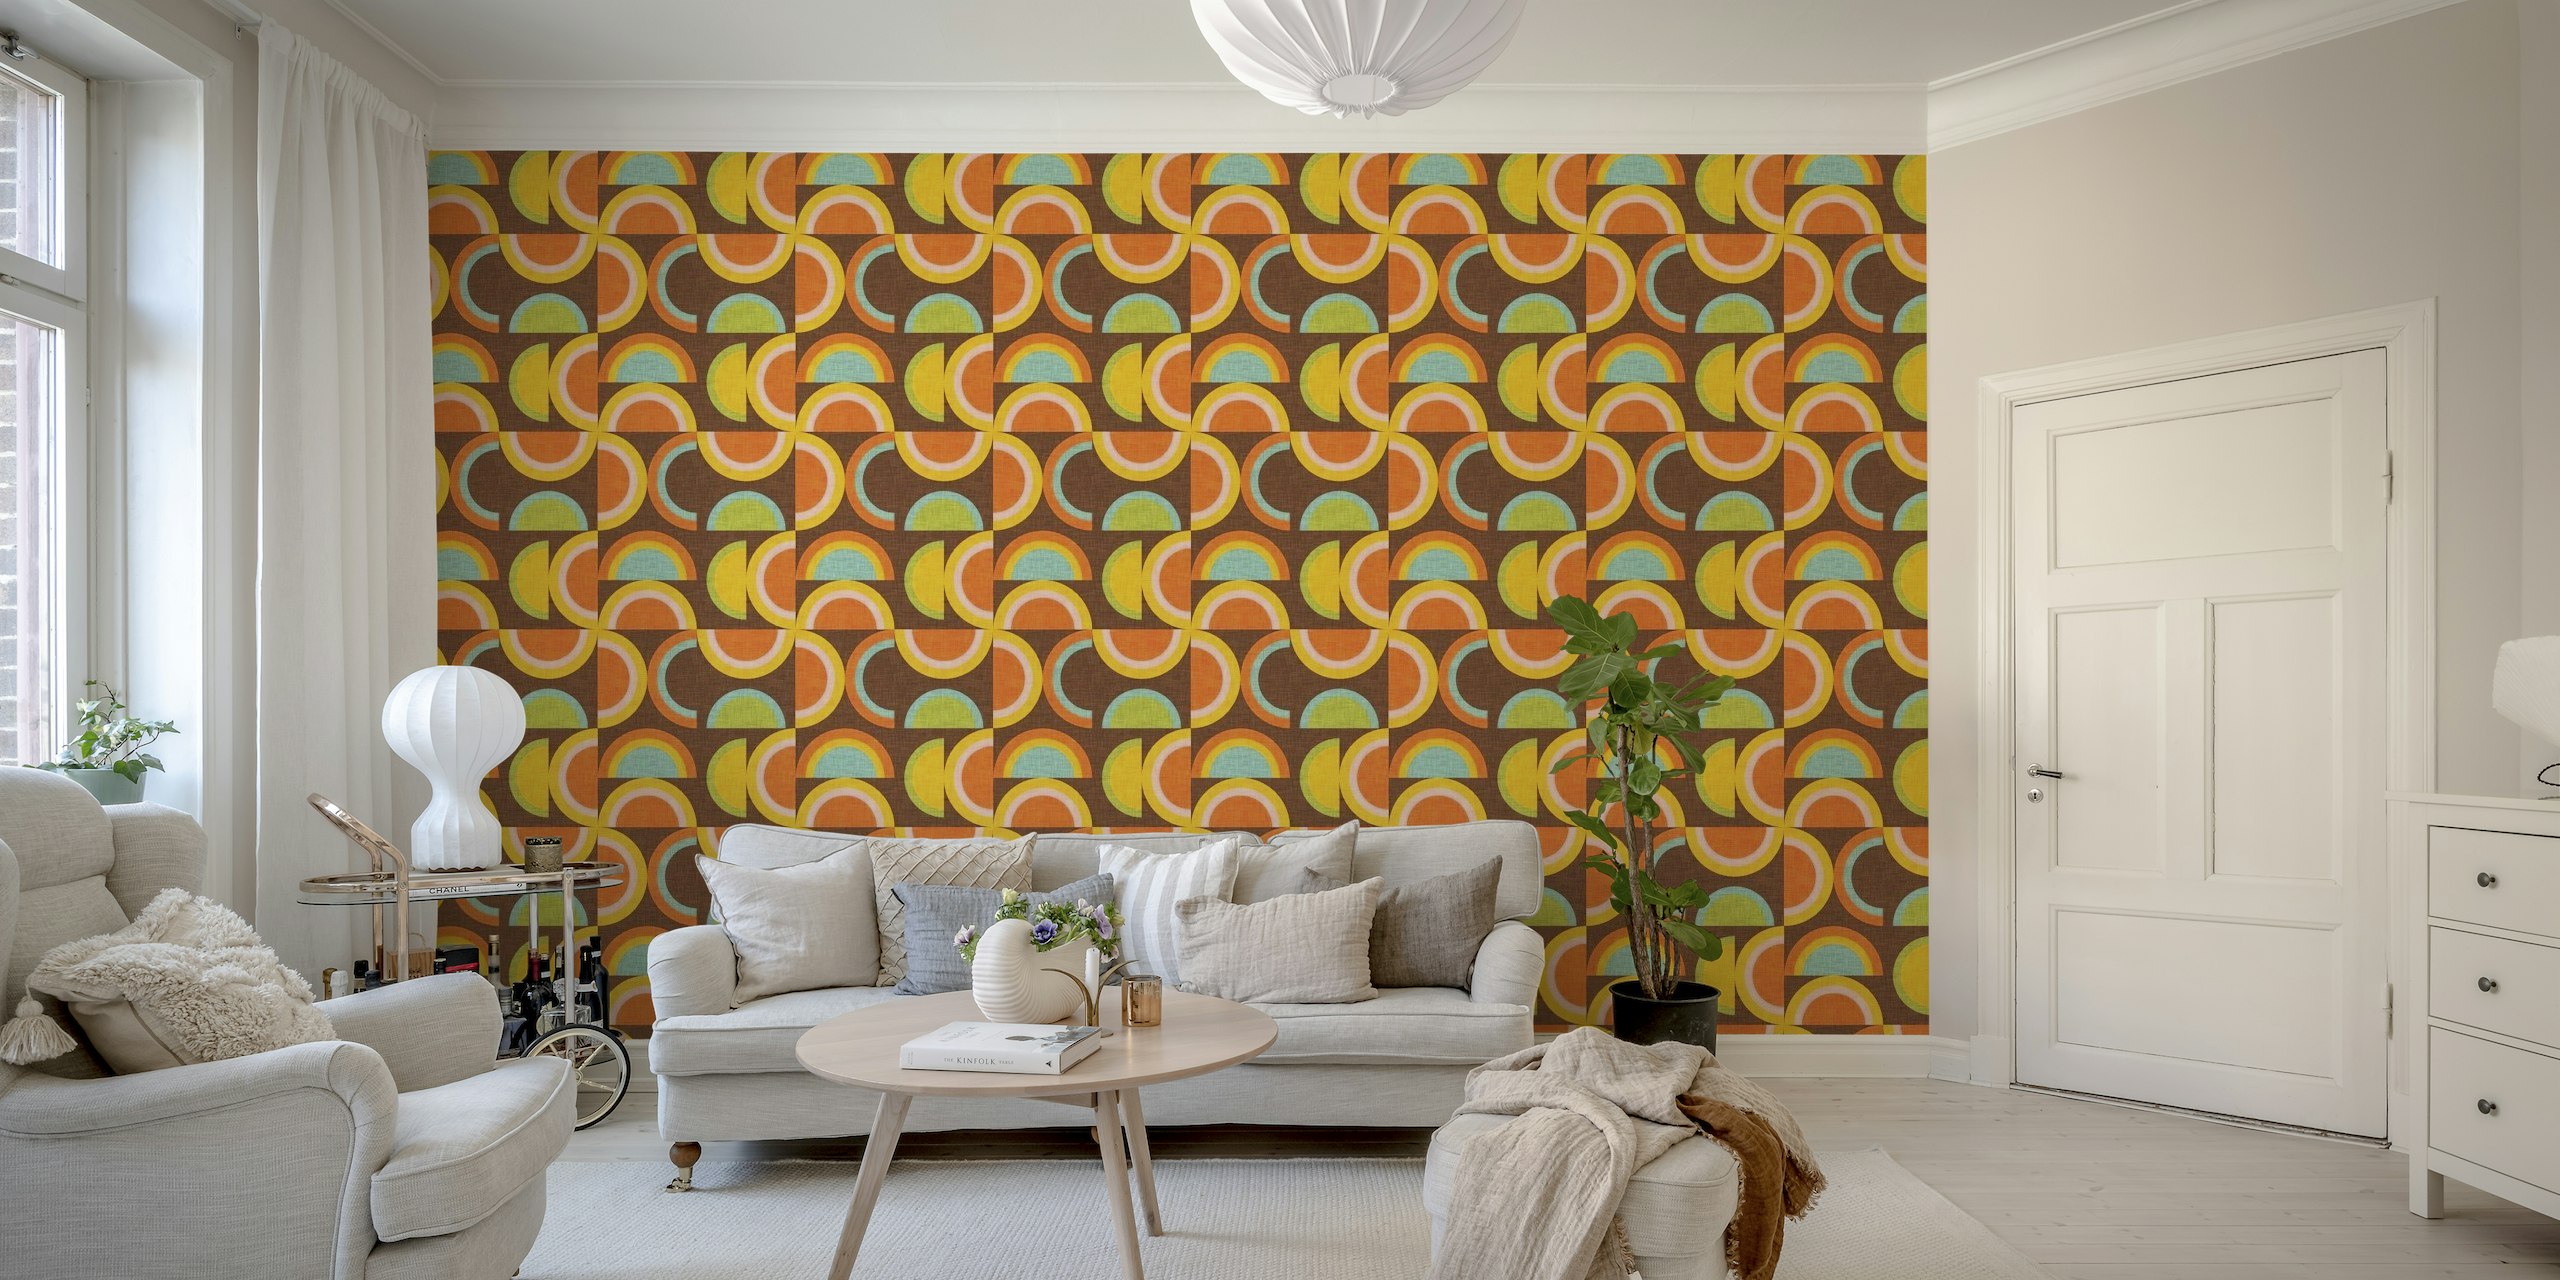 70s Semi-Rainbow Wall Mural featuring warm earth tones and mid-century geometric shapes.